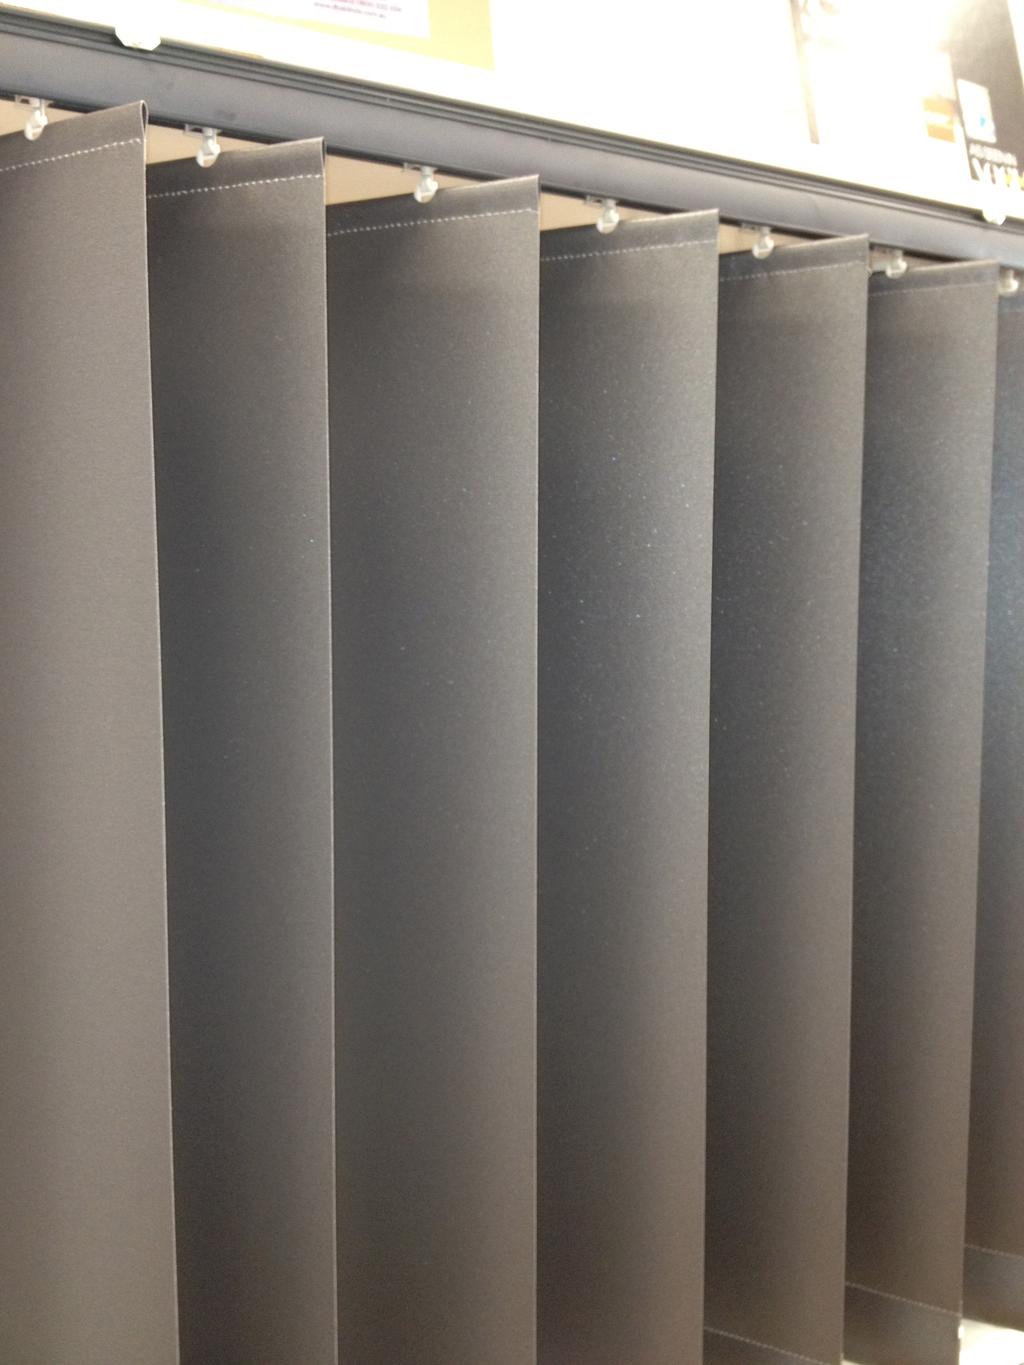 Vertical Blinds Buy 1 get 1 FREE Limited Time! Verticals can be made with 2 slat sizes.